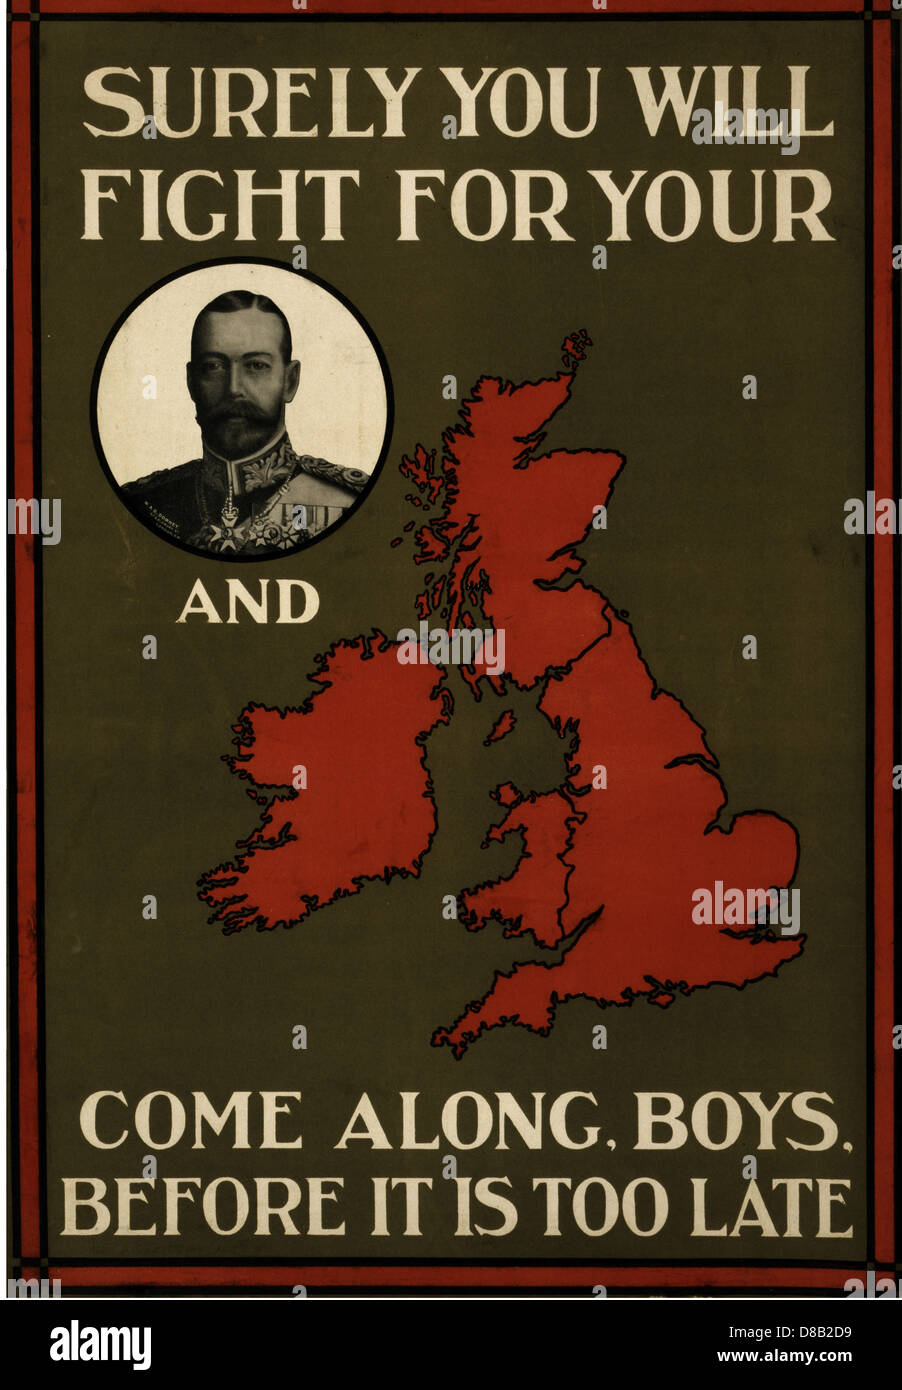 Surely you will fight for your King George V and Great Britain. Come along, boys, before it is too late 1915 British Enlist Prop Stock Photo